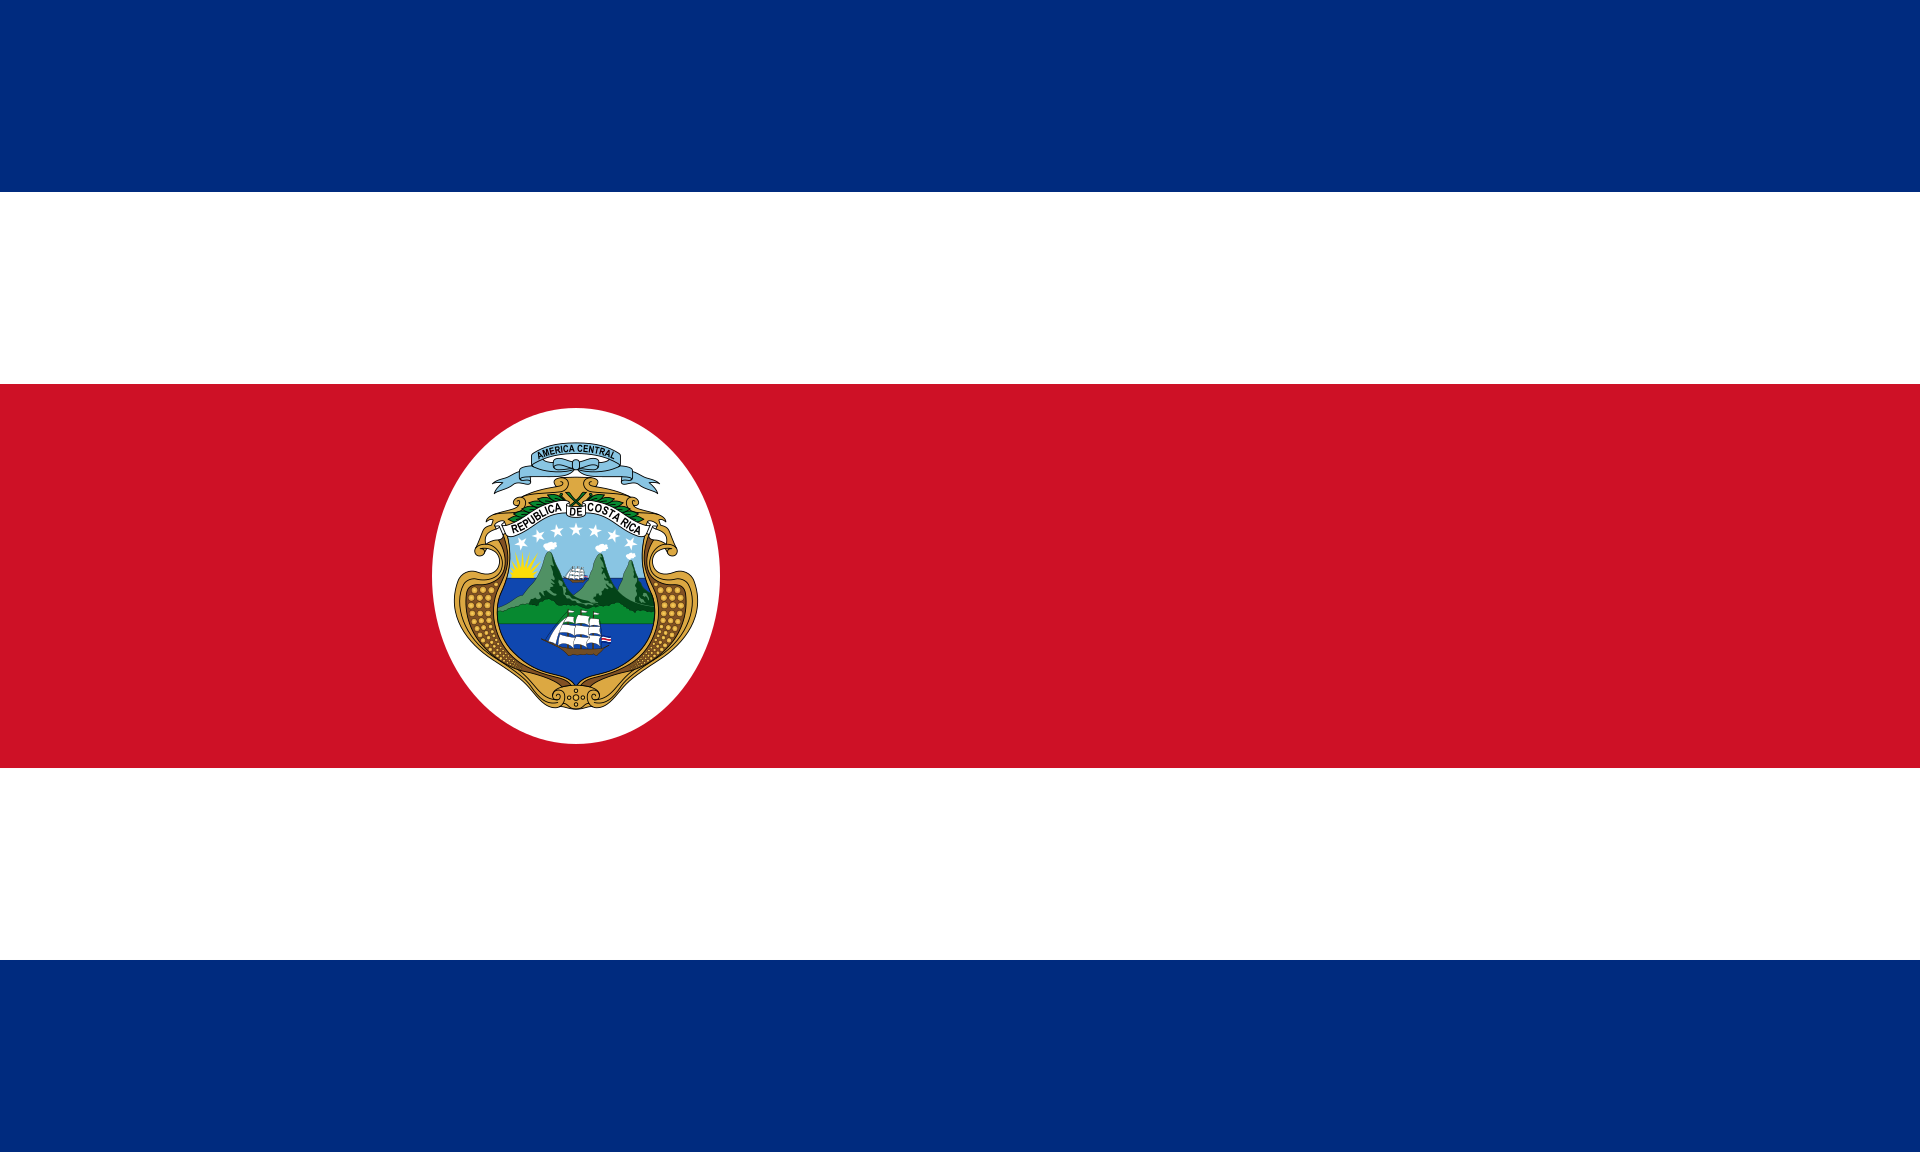 The national flag of the Republic of Costa Rica